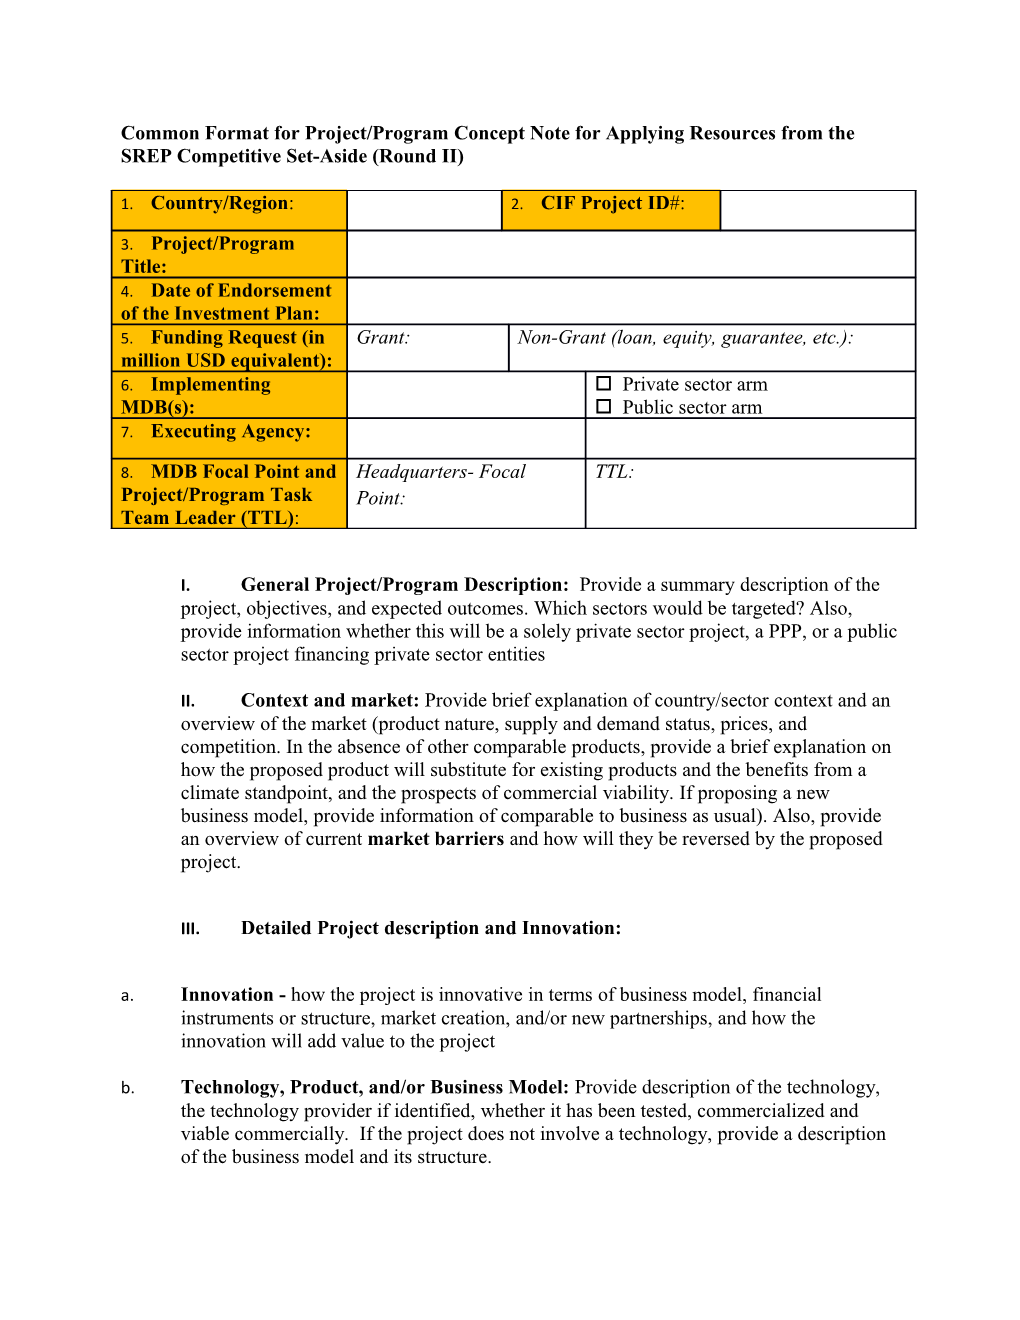 Common Format for Project/Program Concept Note for Applying Resources from the SREP Competitive